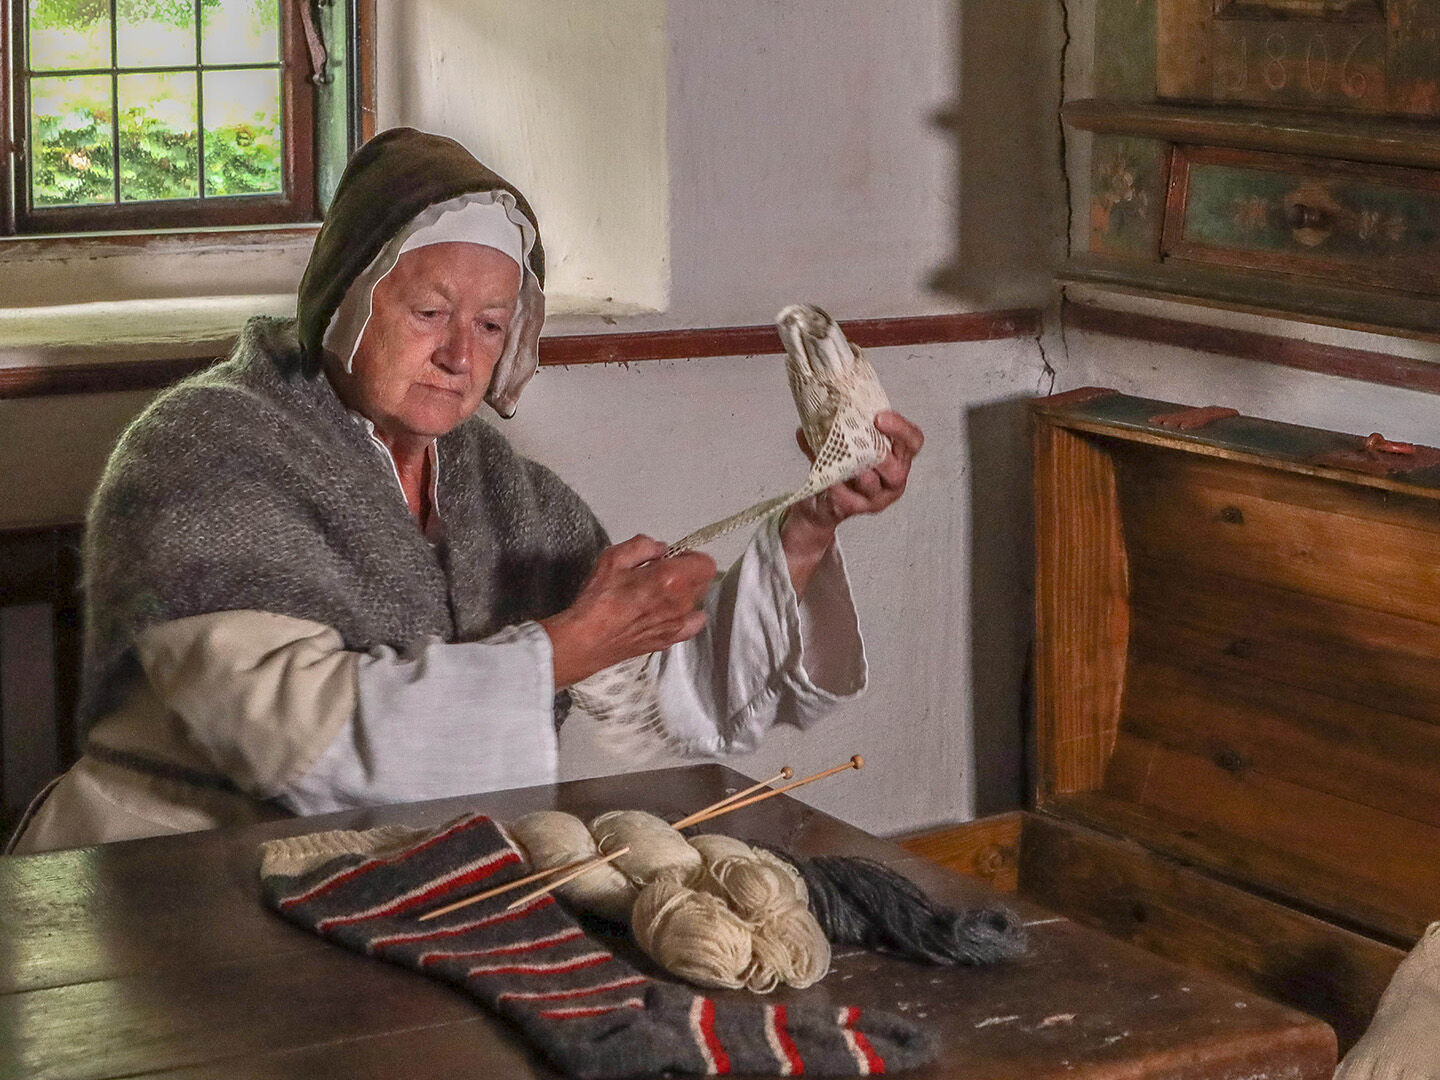 One of the museum's volunteers wearing an old costume sits by the knitting in one of the old houses at the open-air museum.